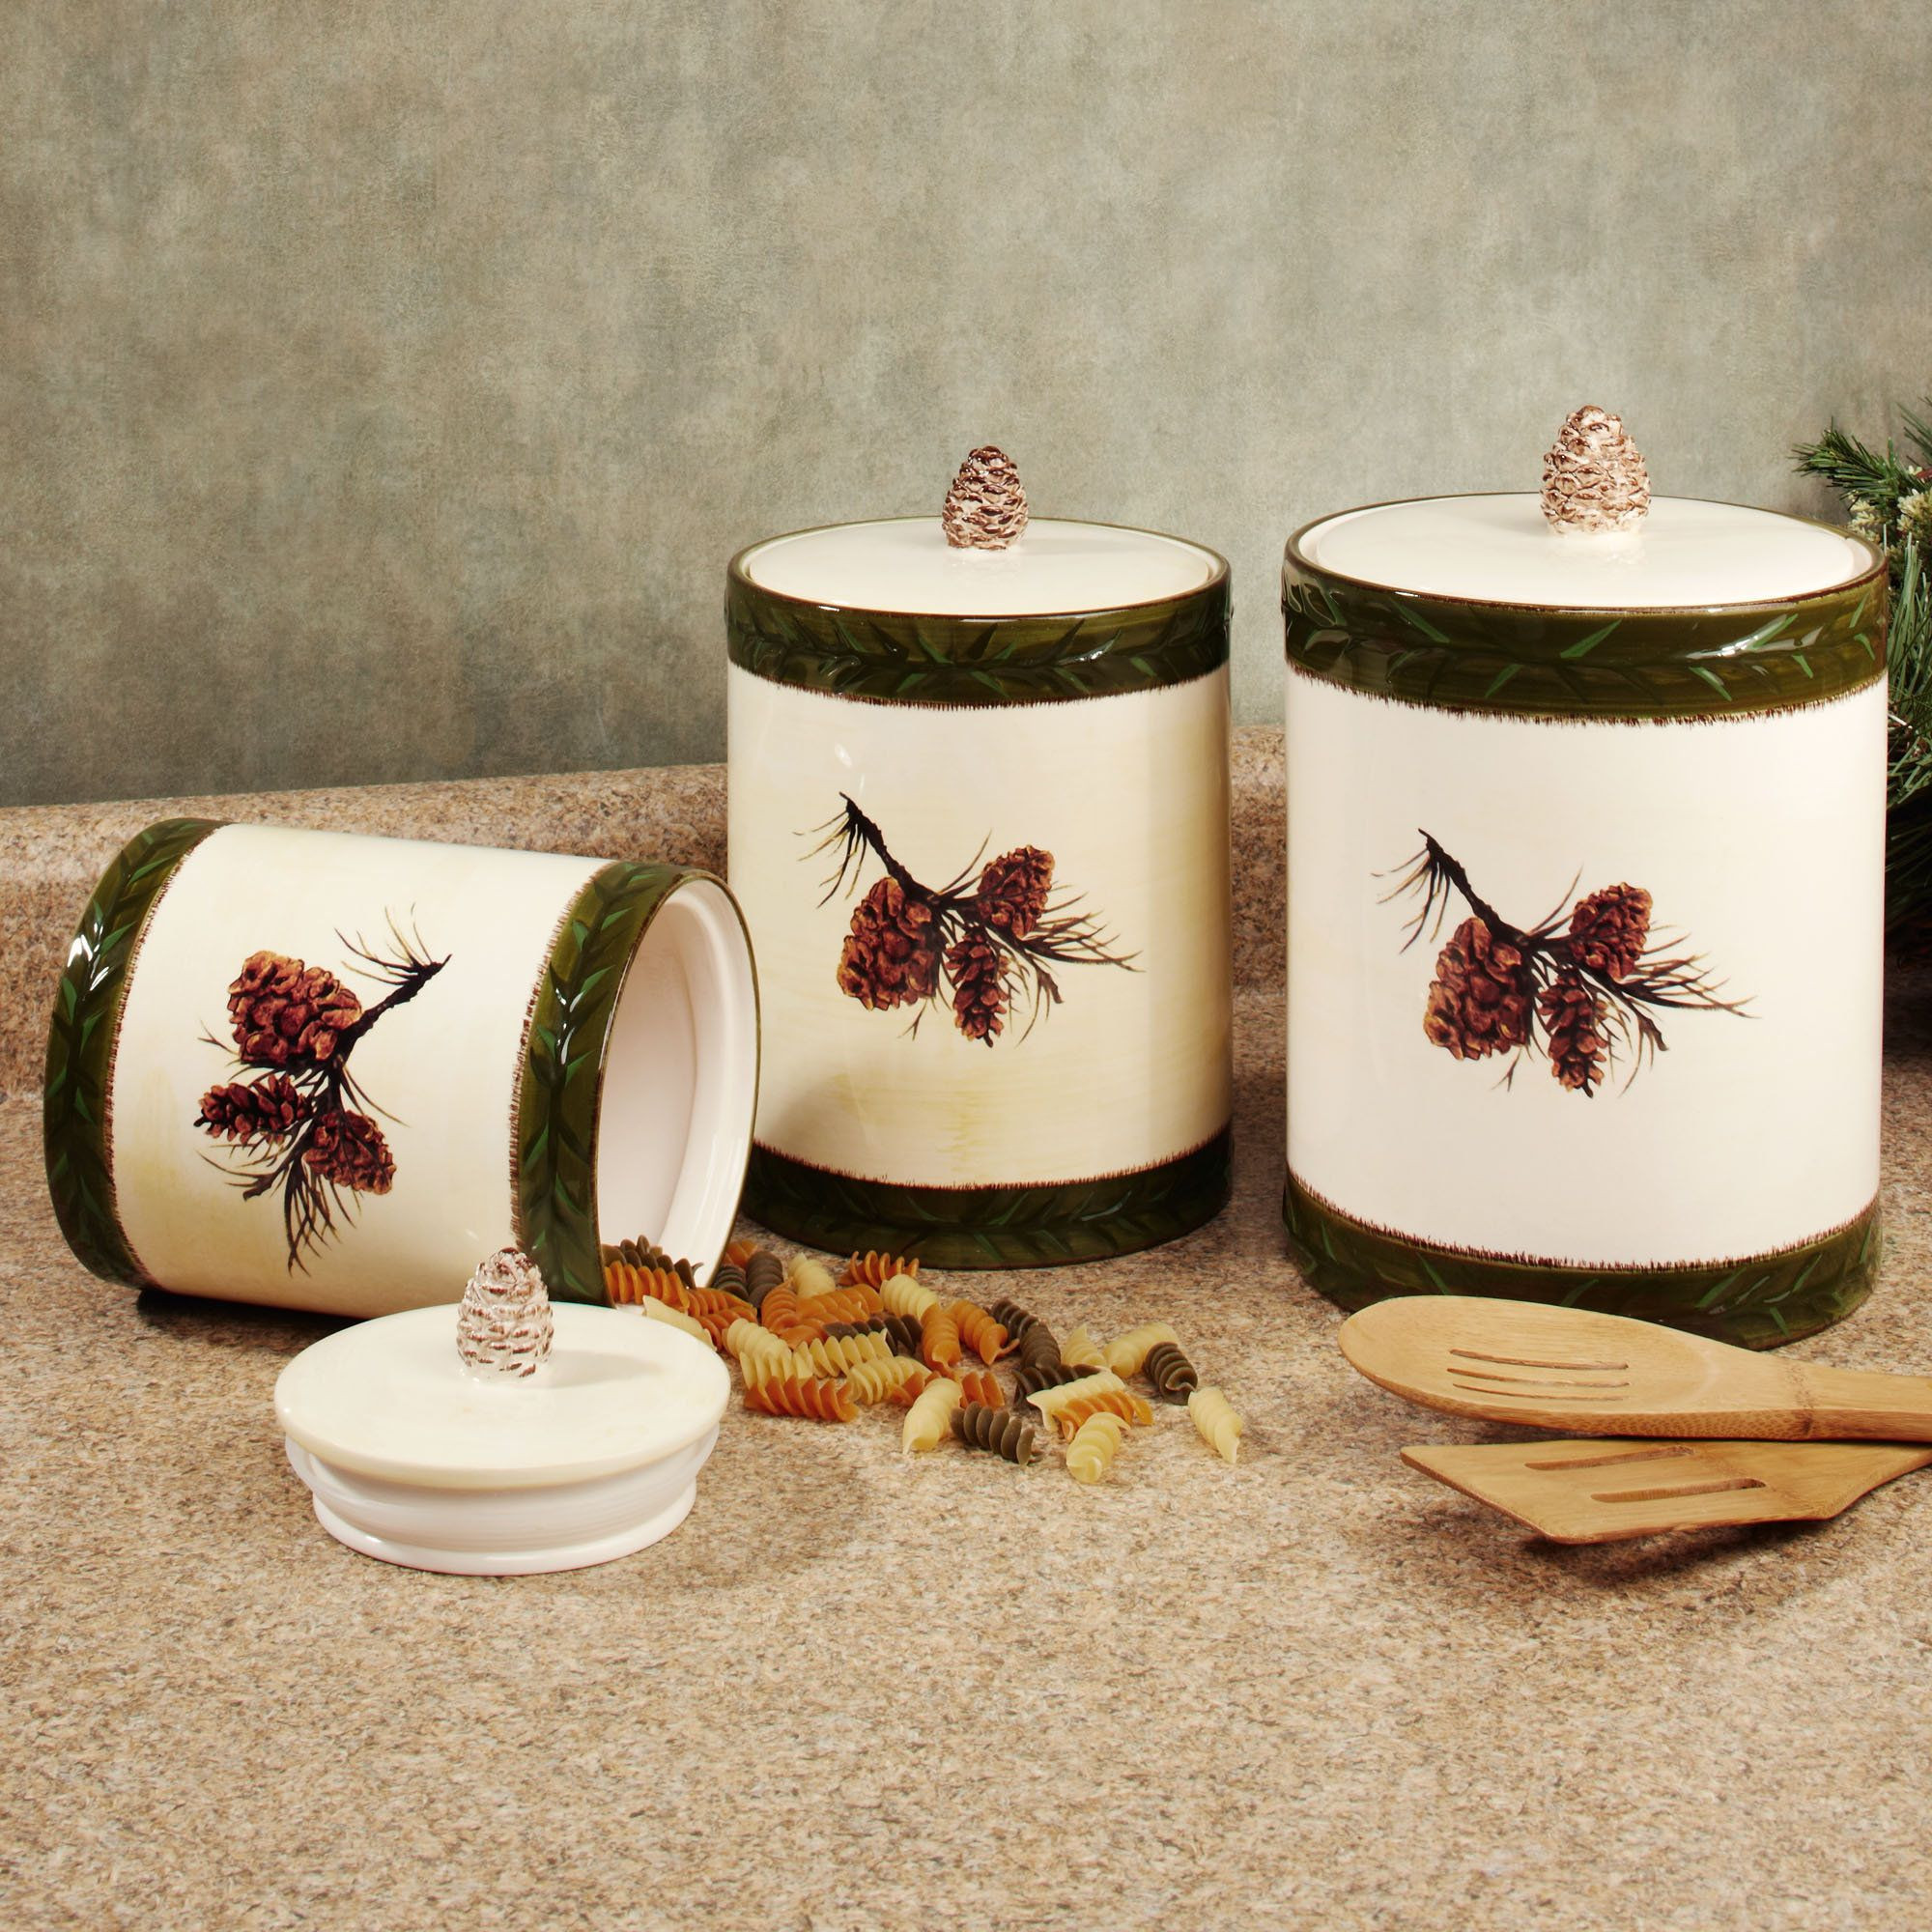 Rustic Kitchen Canisters
 Pine Cone Rustic Kitchen Canister Set